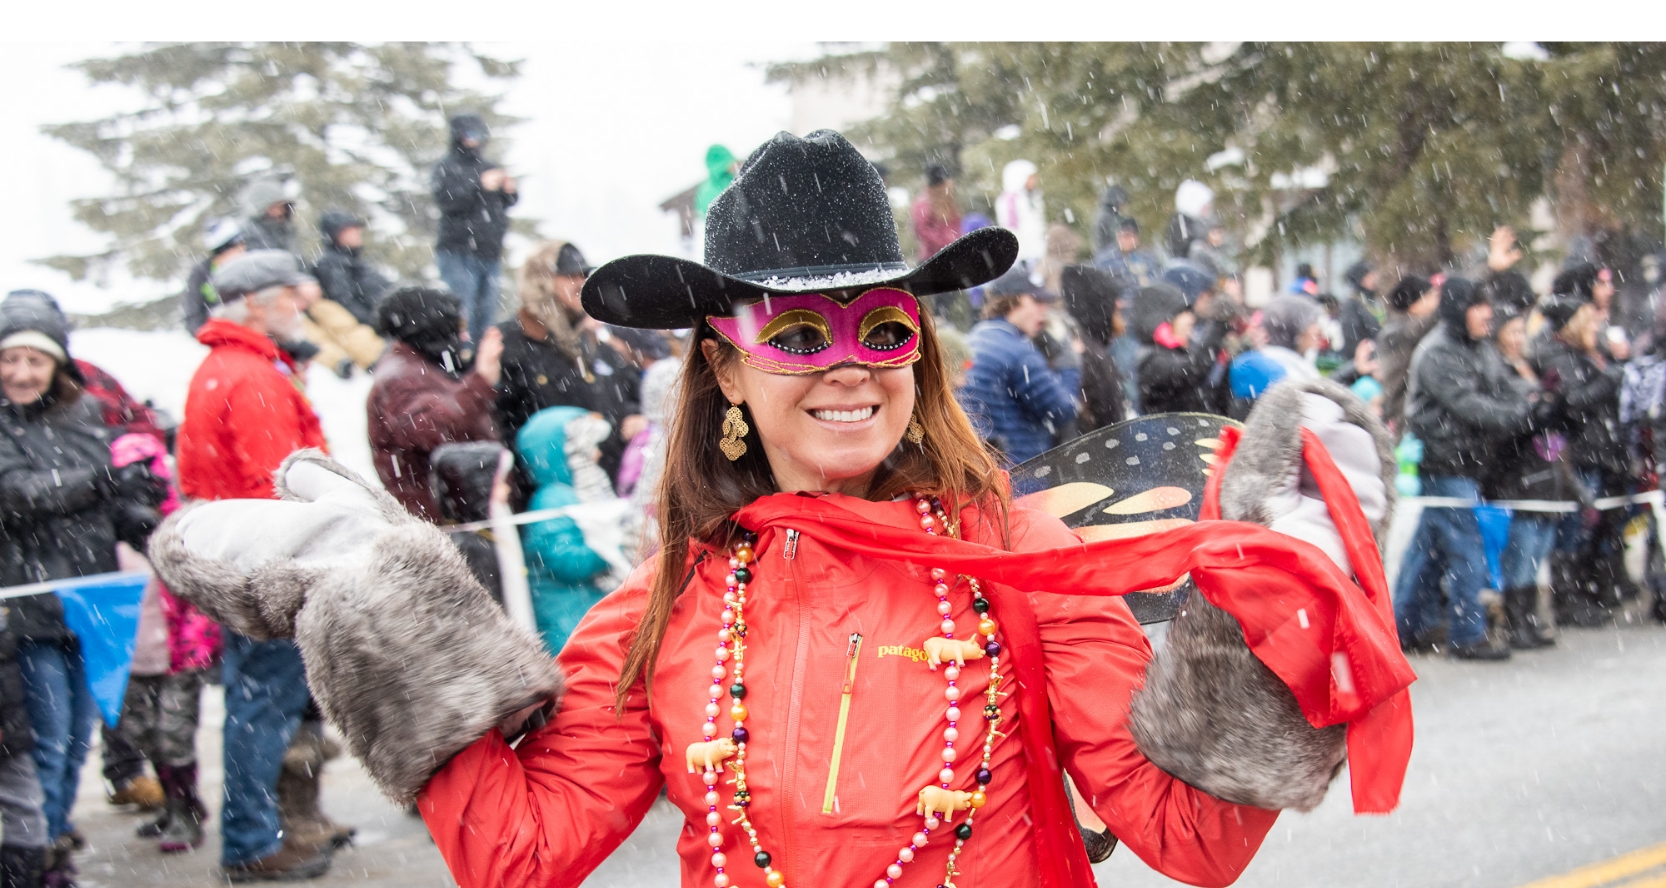 A woman in a red jacket with giant mittens smiles and walks through a snowy parade.